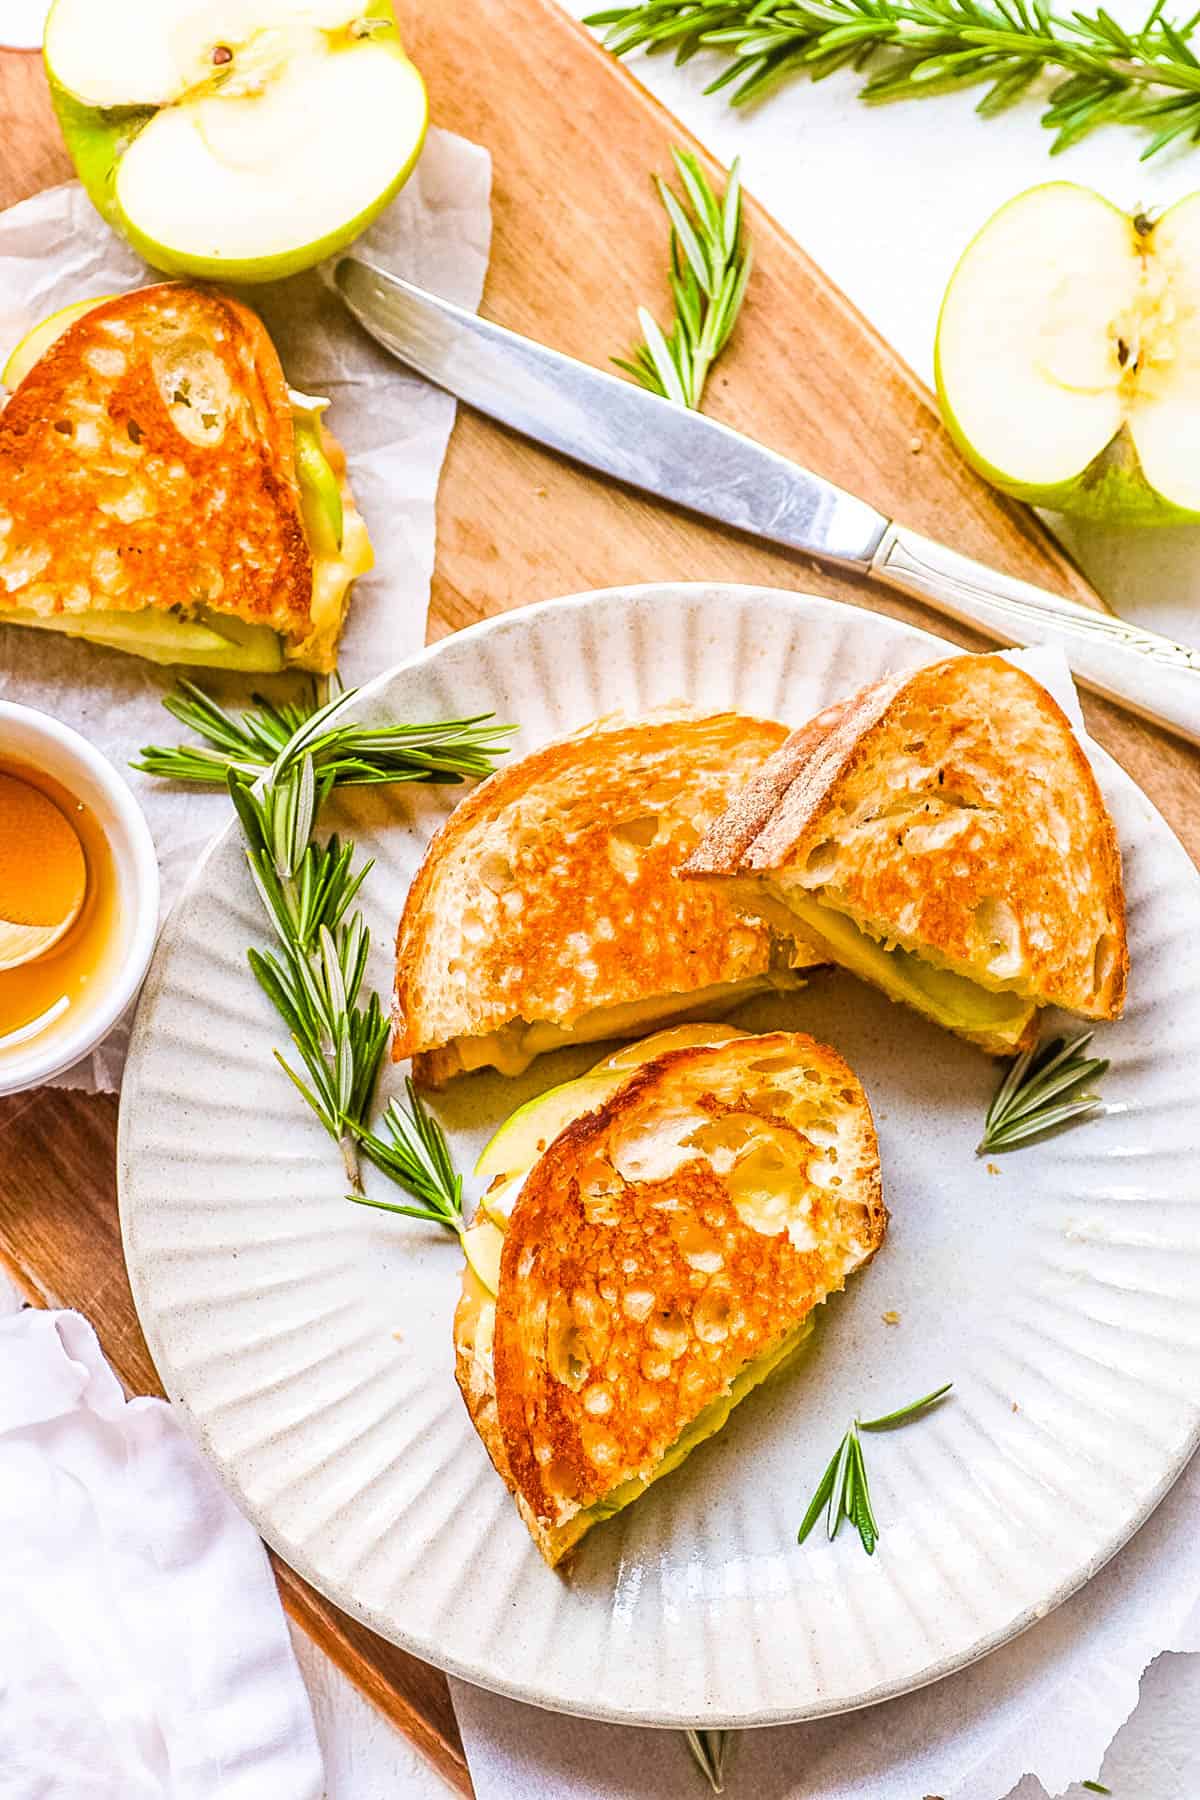 Sourdough grilled cheese sandwich with apple and brie cut and stacked on a plate with fresh herbs.